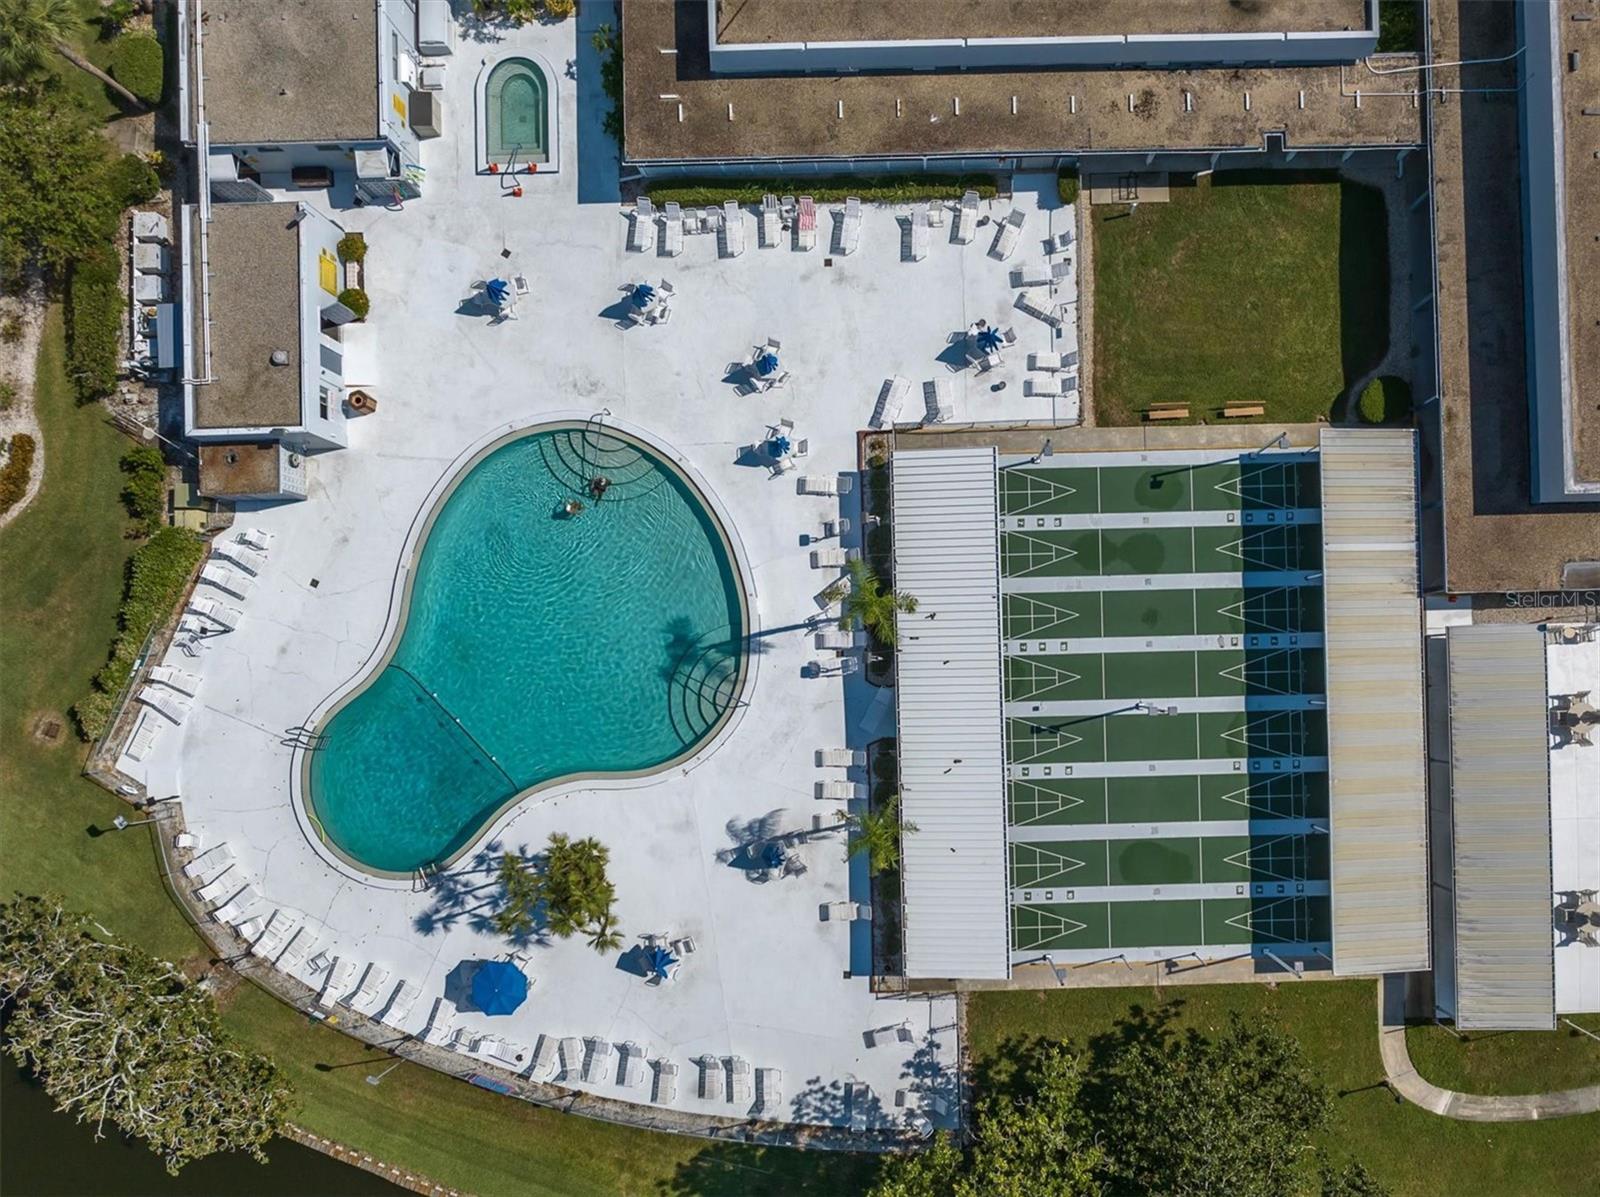 Heated pool, spa, shuffleboard, outdoor patio; restrooms top left of frame; on-site management office at the top of the frame (Ridge Seminole Mgmt Corp is the property management company).